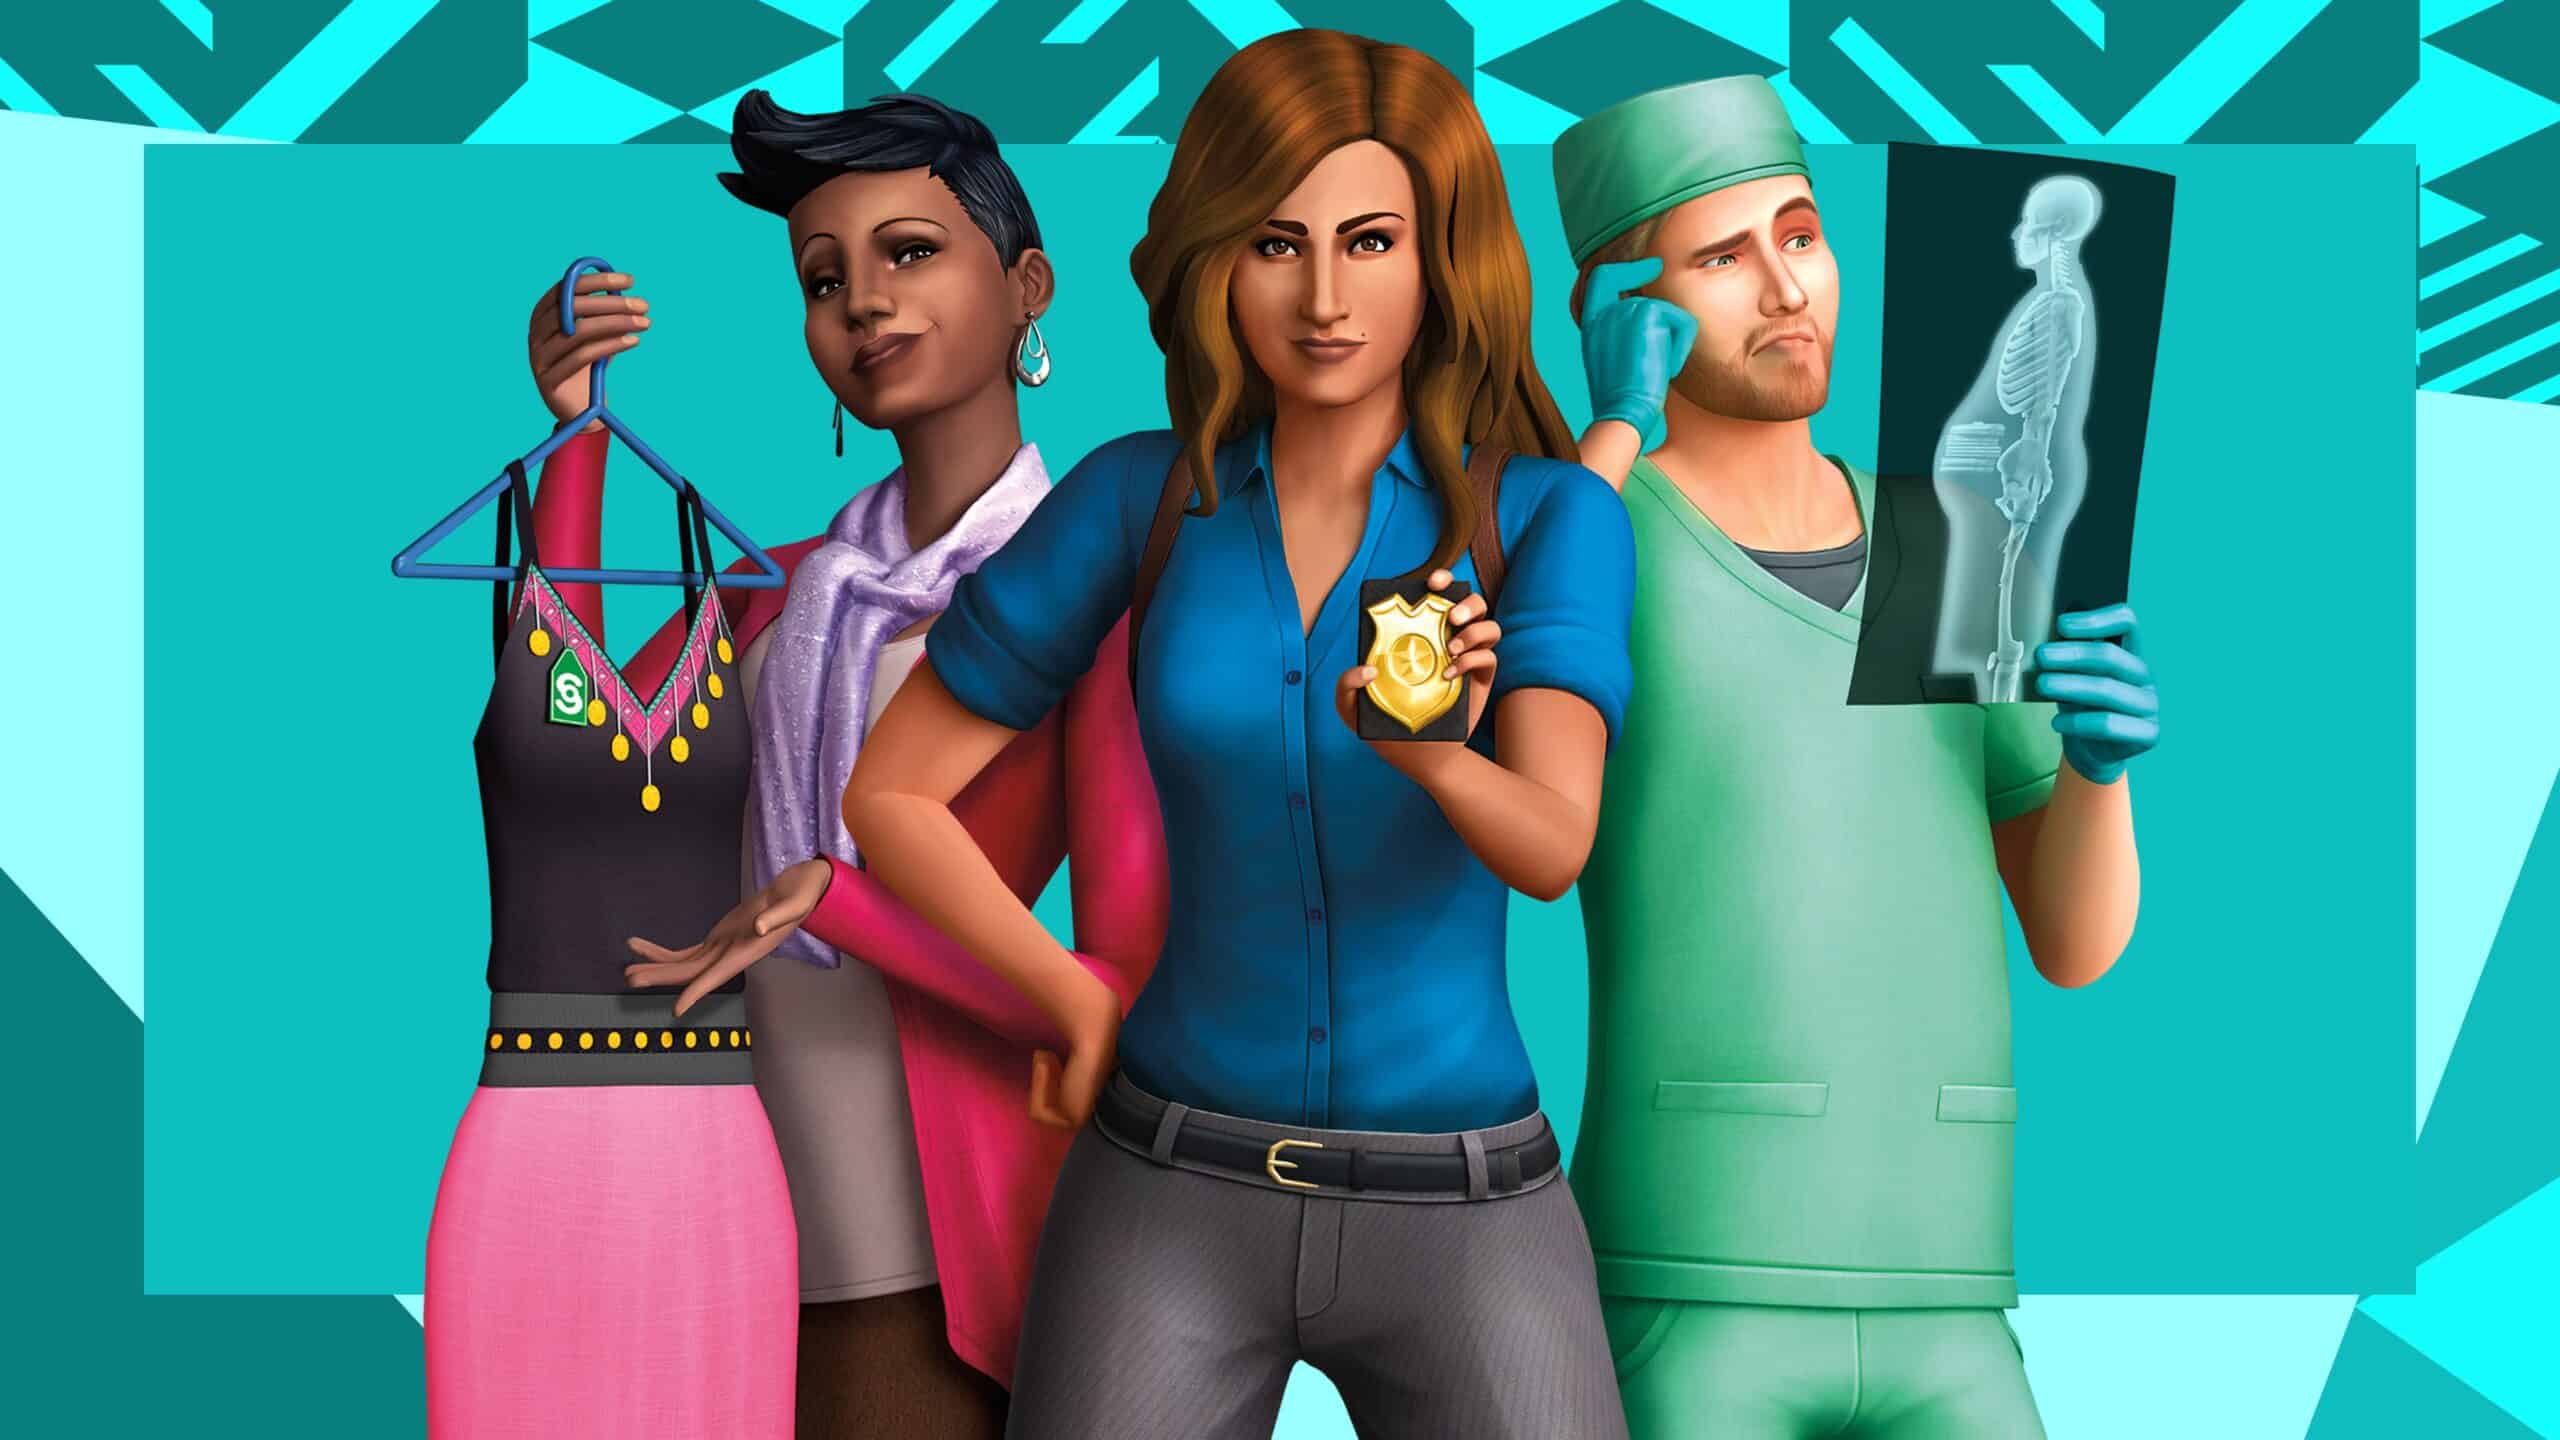 The Sims 4: Get to Work Career